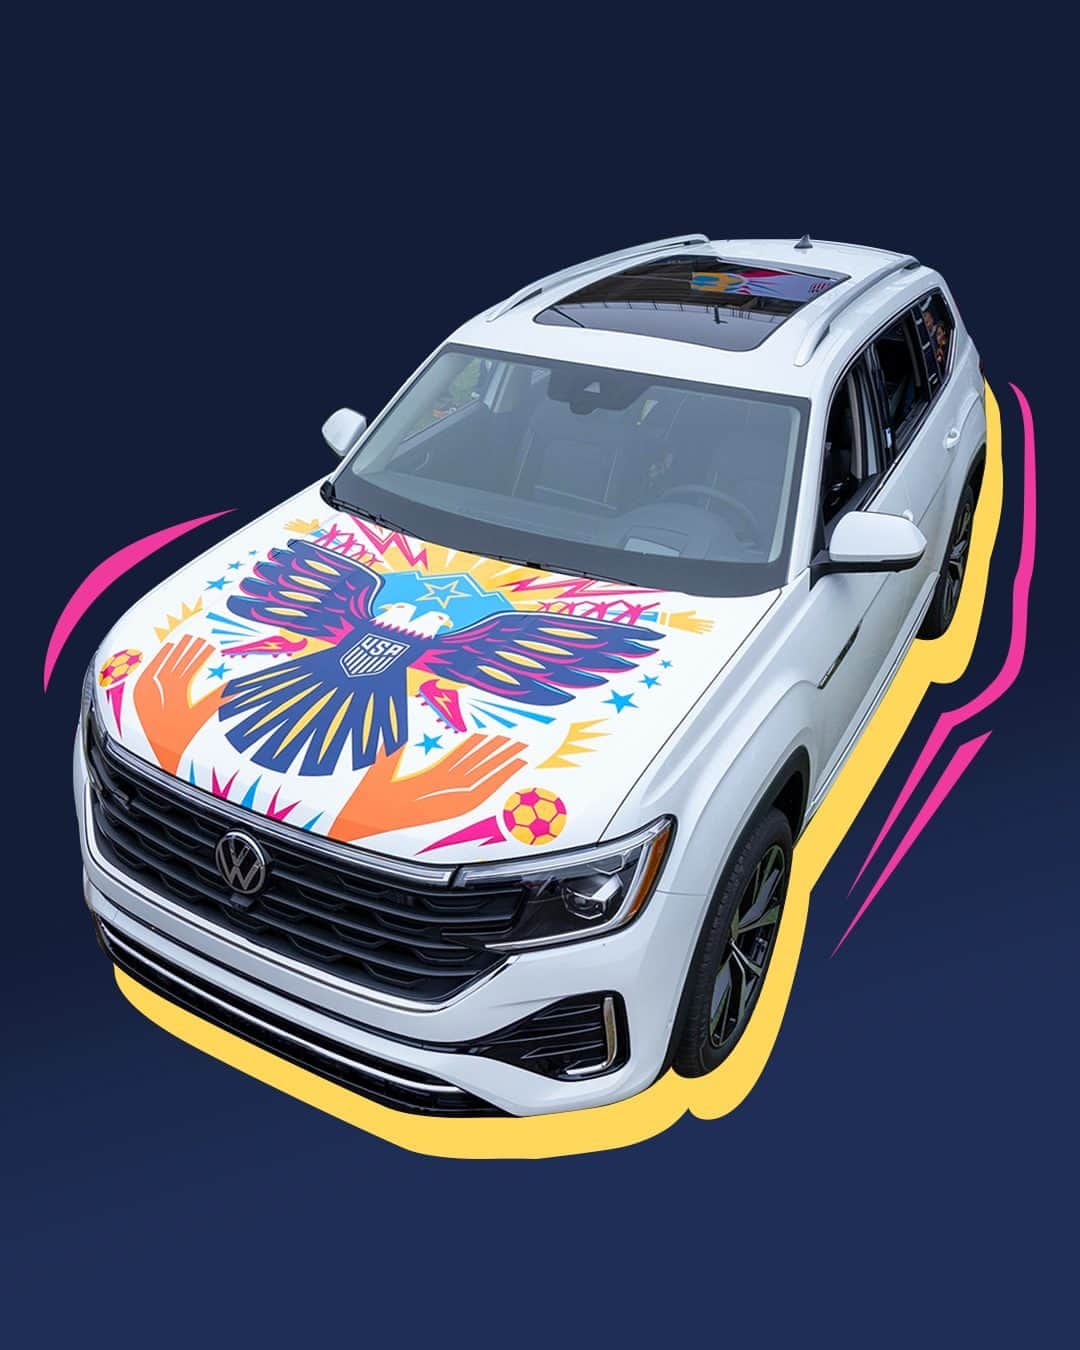 Volkswagen USAのインスタグラム：「A game that brings us together. A VW that gets us there.  In collaboration with @att and the @ussf, @usmnt player @pepi_ricardo and Latinx artist @luispins teamed up to create a custom design in celebration of Hispanic Heritage Month and the diverse players who represent U.S. Soccer. We think their ode to Unity and Family looks pretty great on the Atlas, too.  #VW #VWAtlas #VWLove #HispanicHeritageMonth」